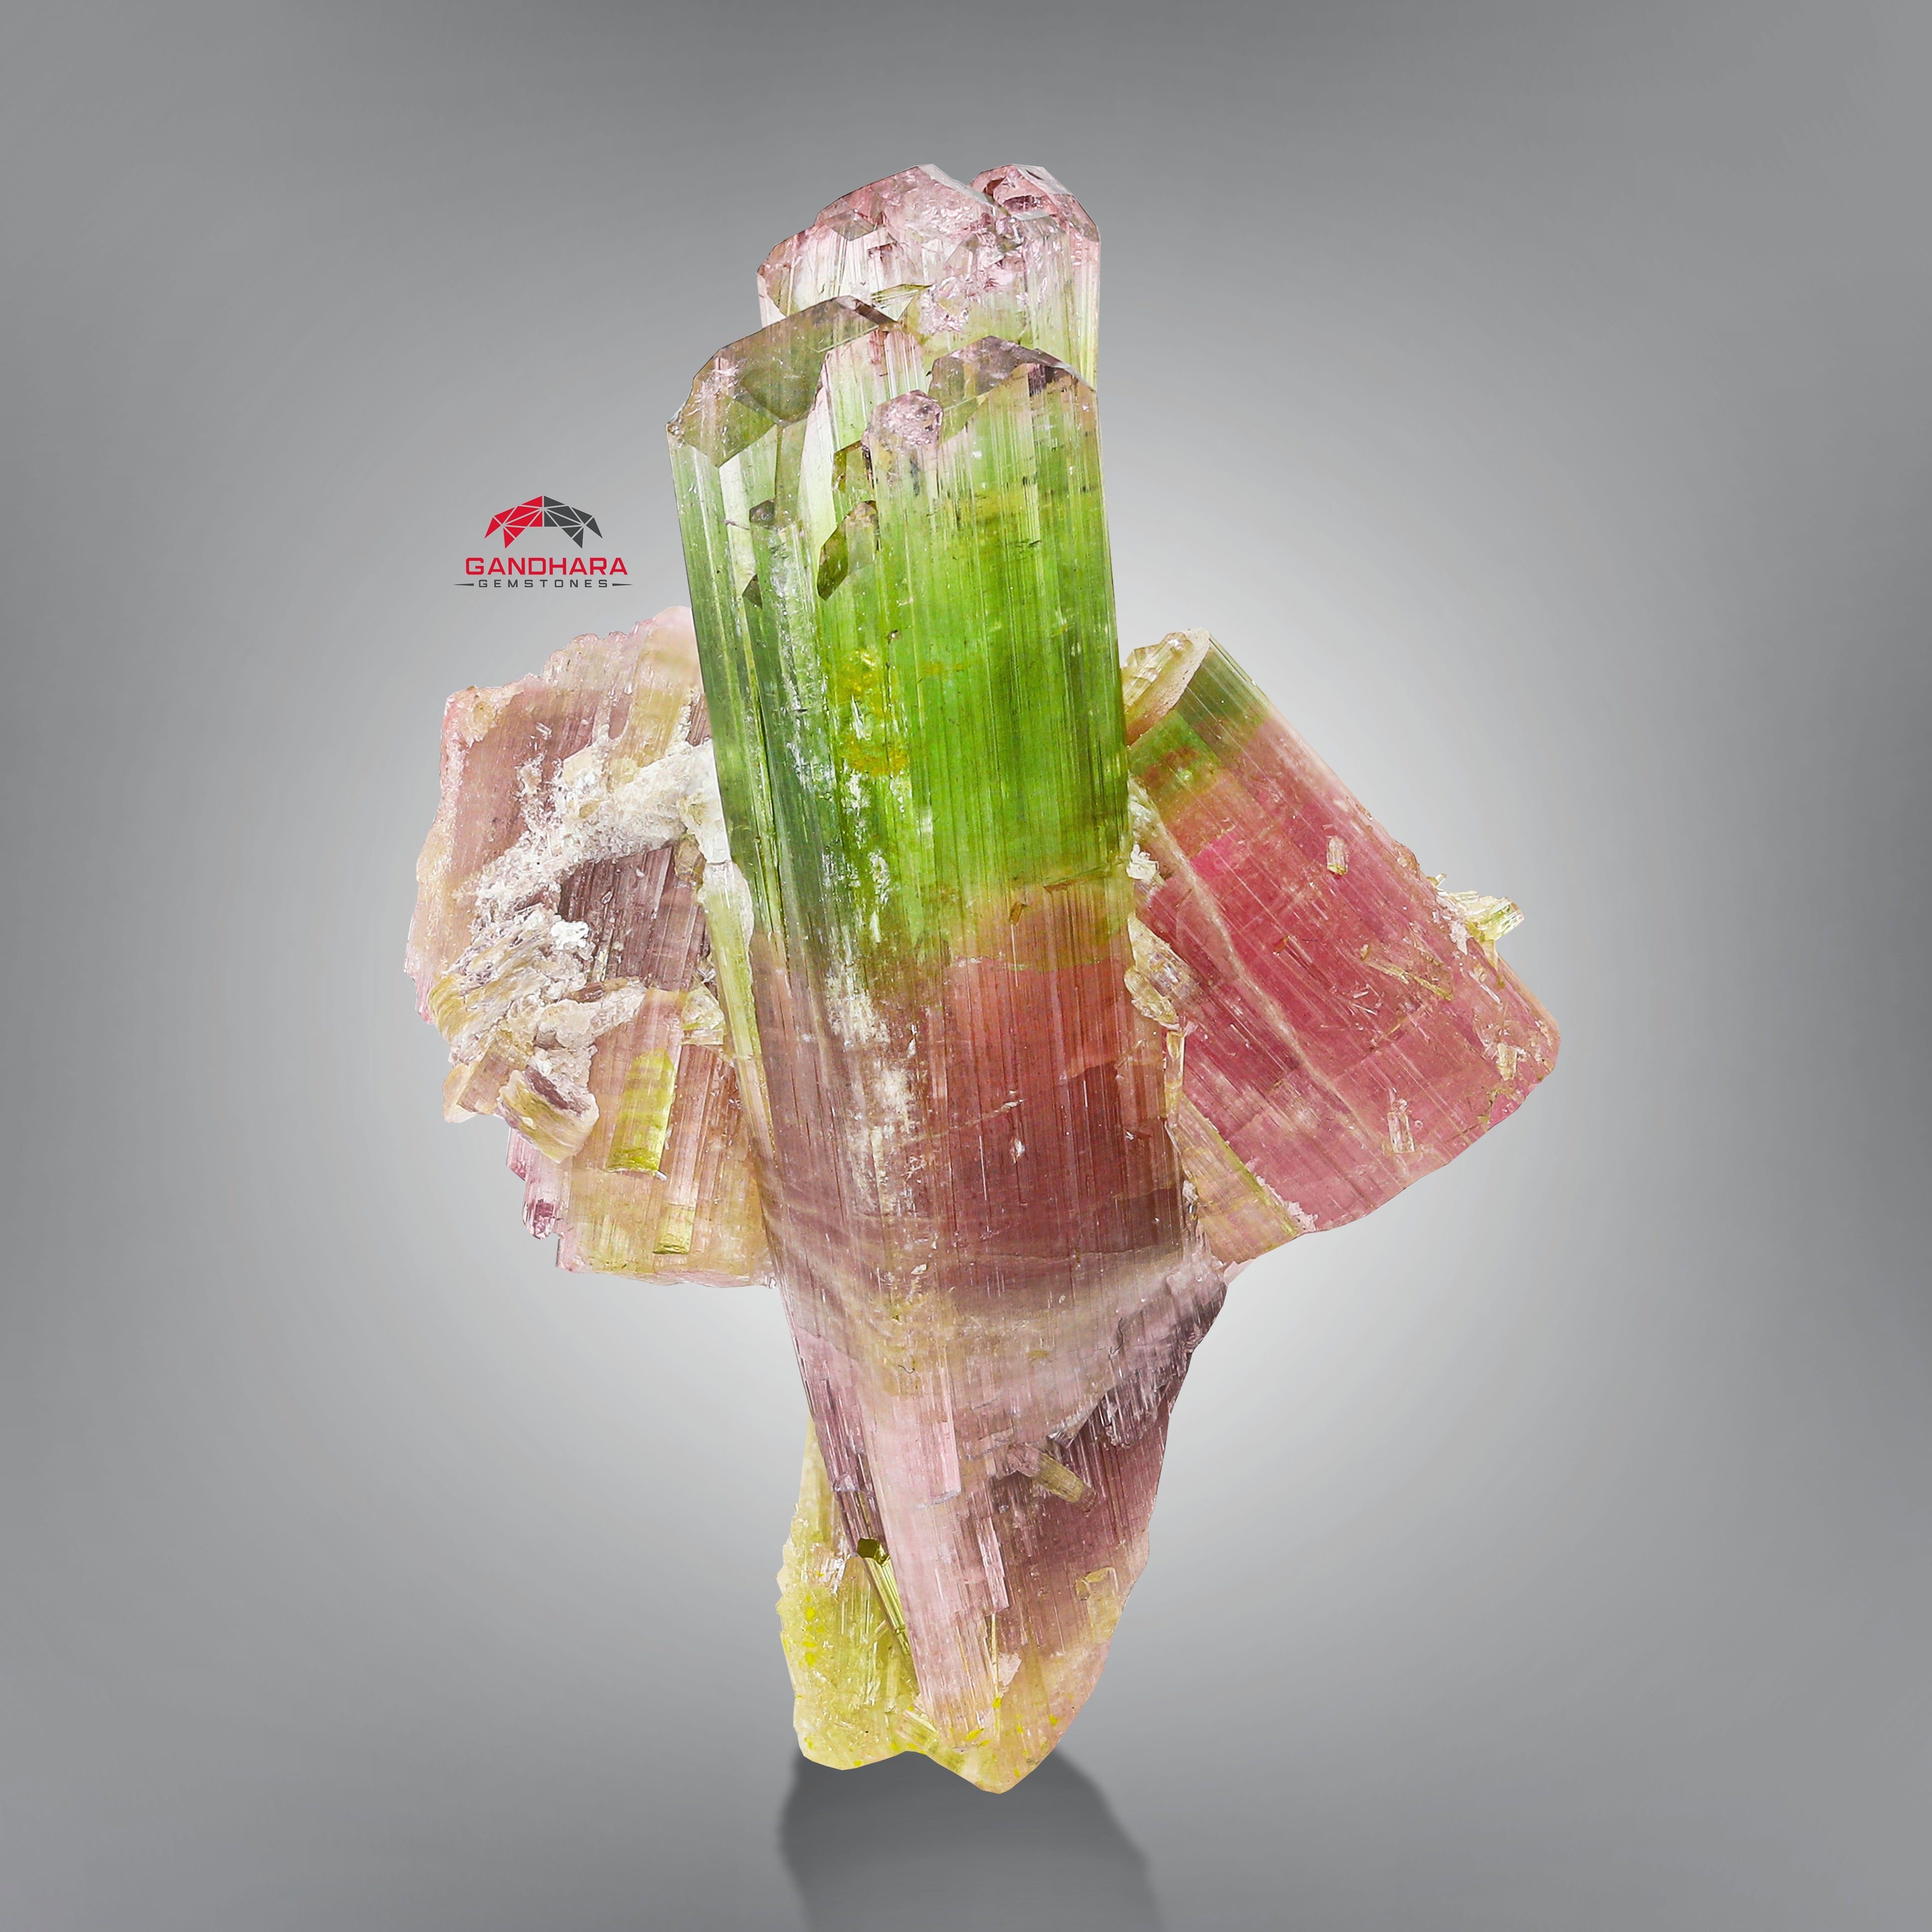 Elbaite Var. Tourmaline "Rocket" With Perfect Side Crystals